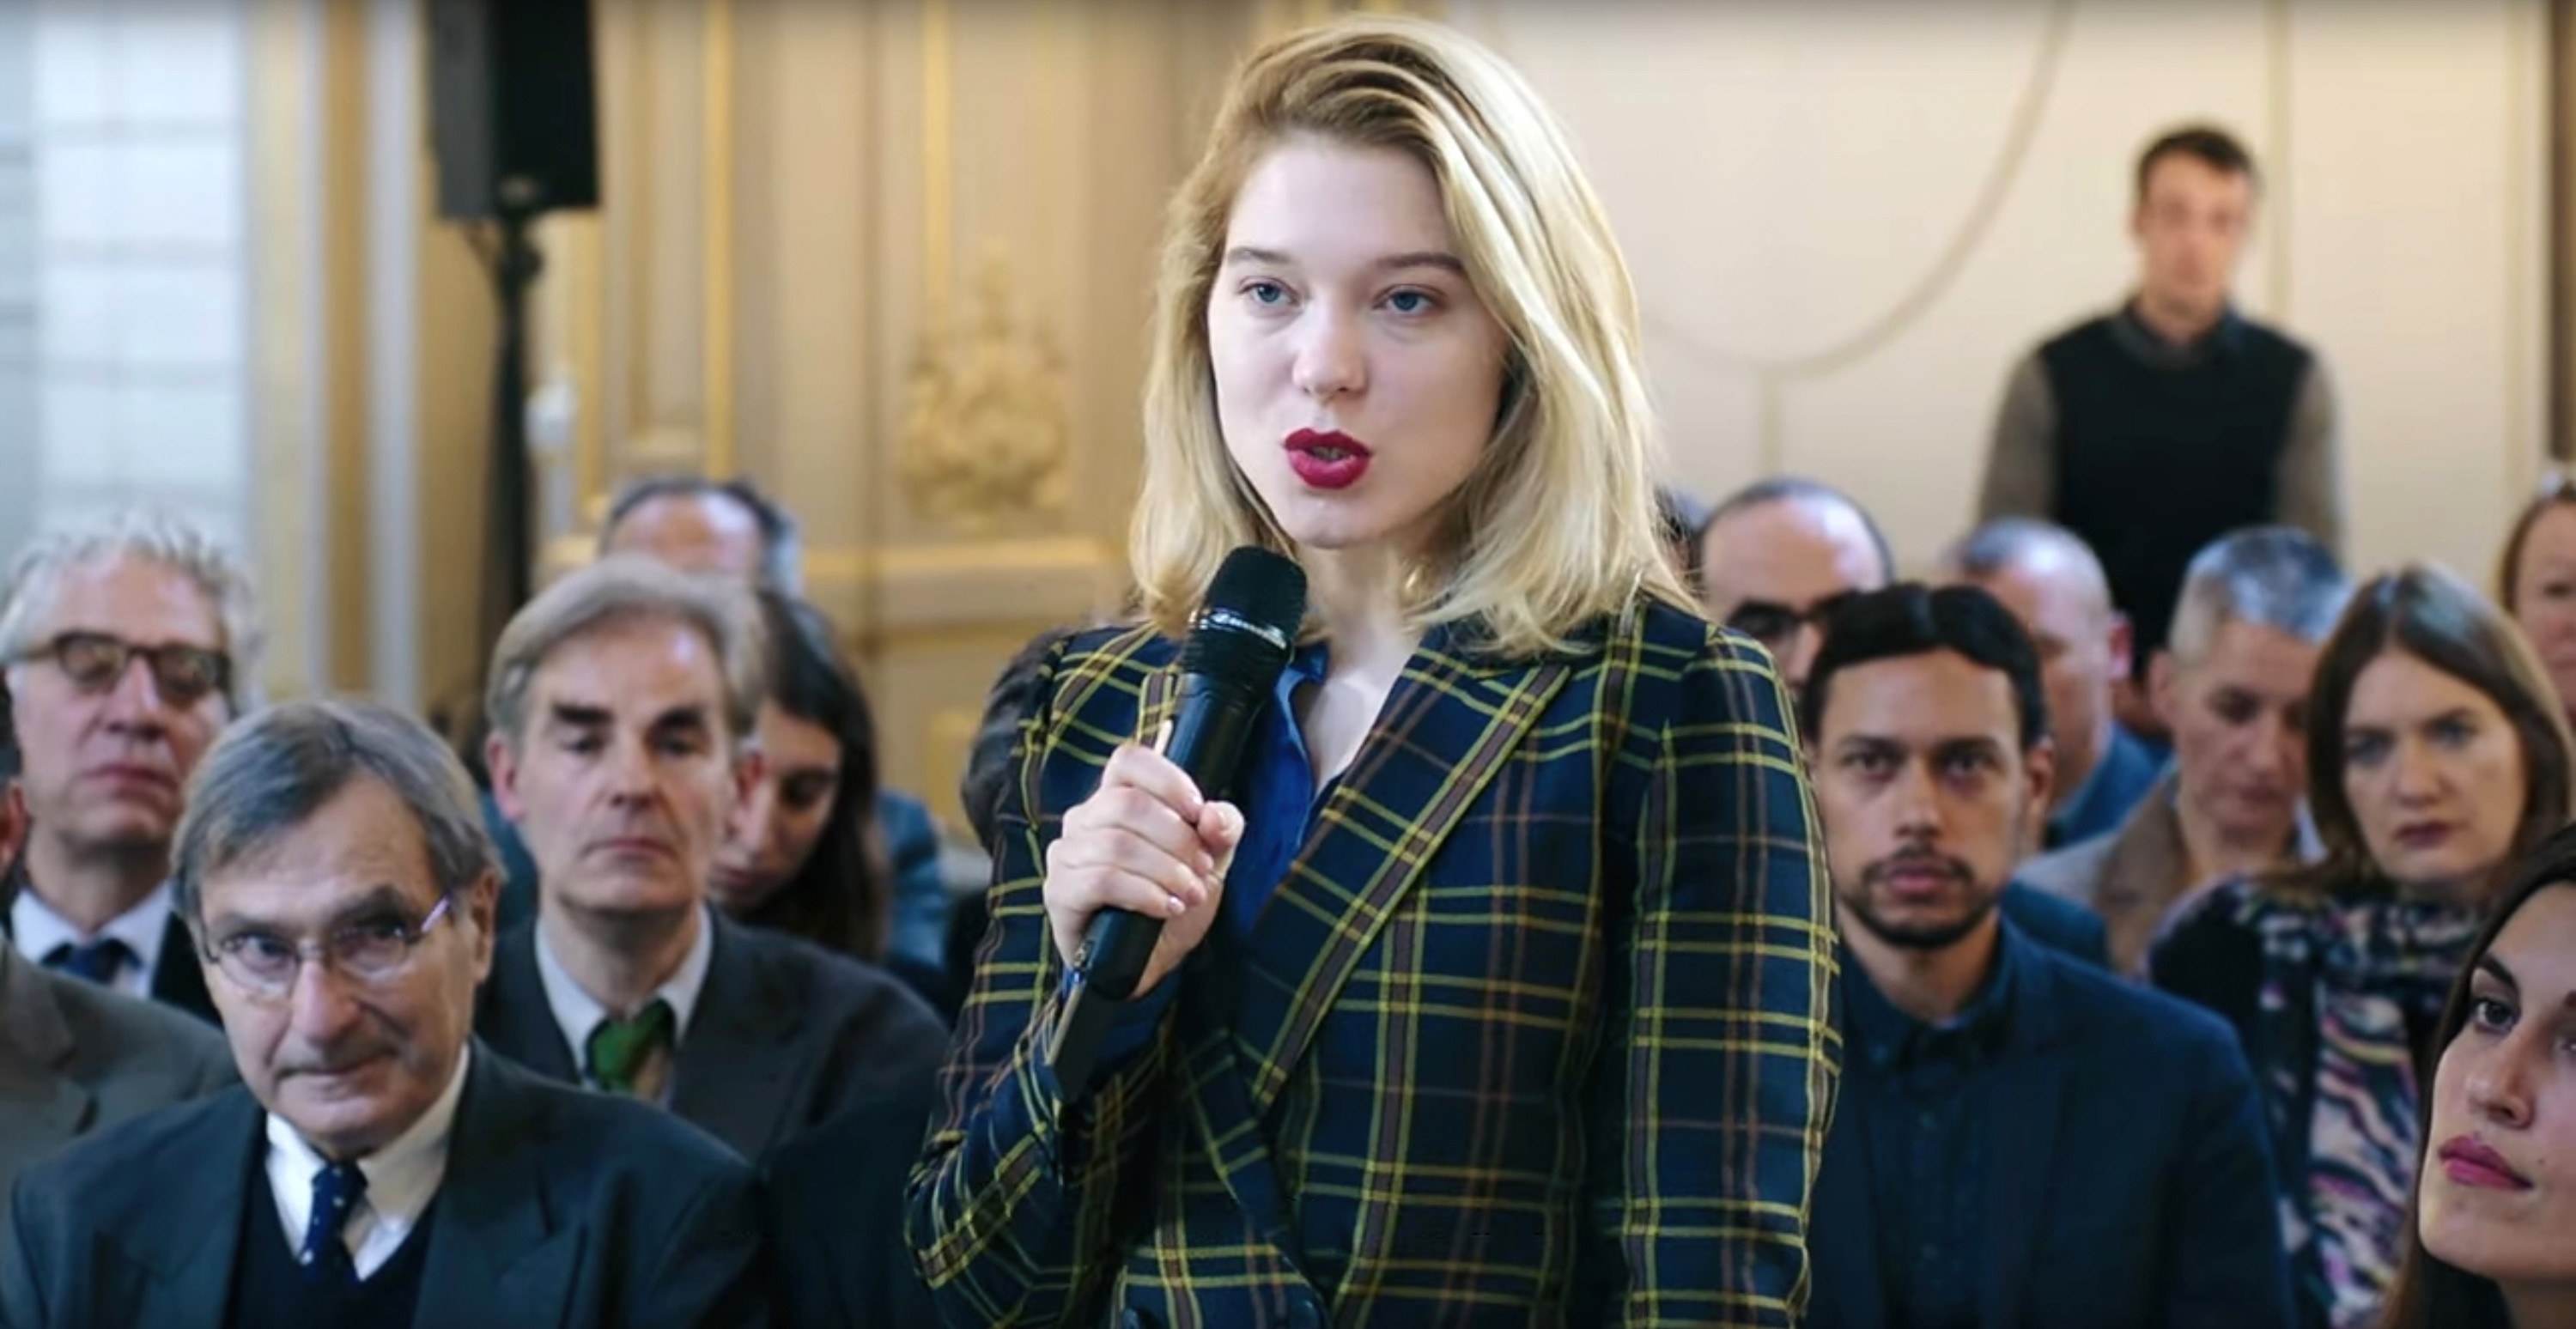 Lea Seydoux stands with a microphone